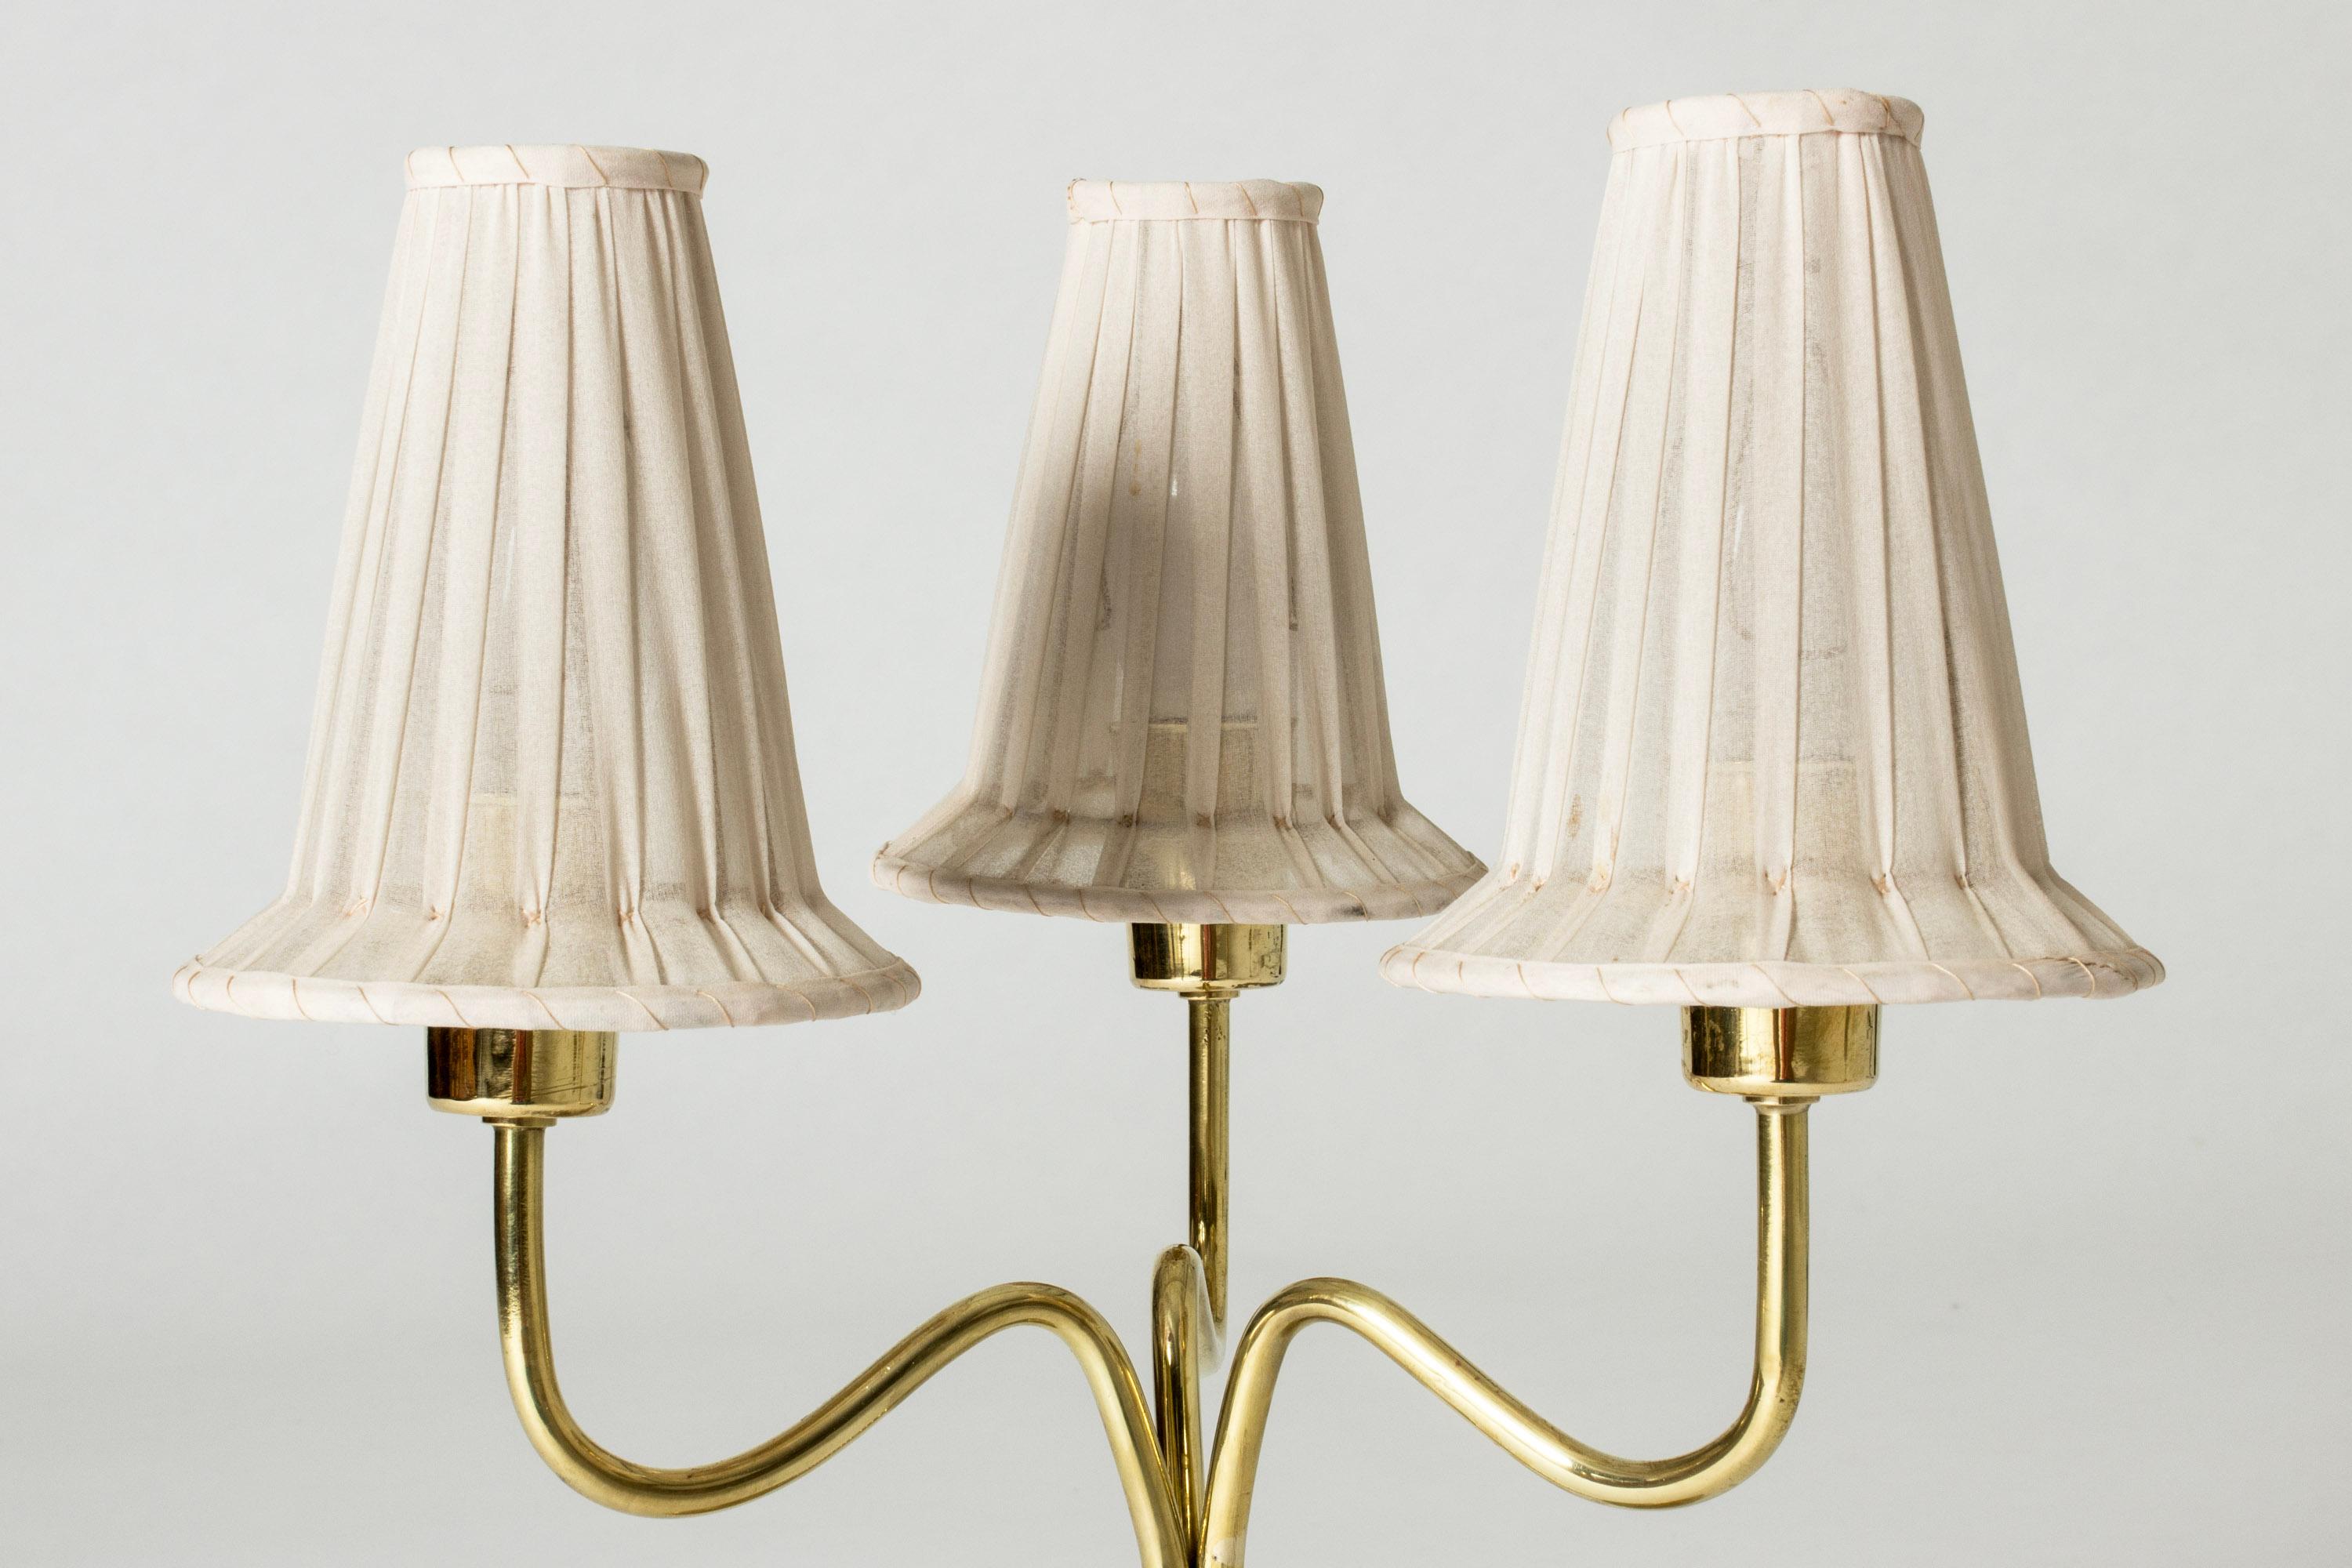 Beautiful, rare table lamp by Hans Bergström, made from brass. Curvesome design with three shades in their original, semi-translucent fabric.

Hans Bergström was the owner and creative director of the lighting firm Ateljé Lyktan, which he founded in